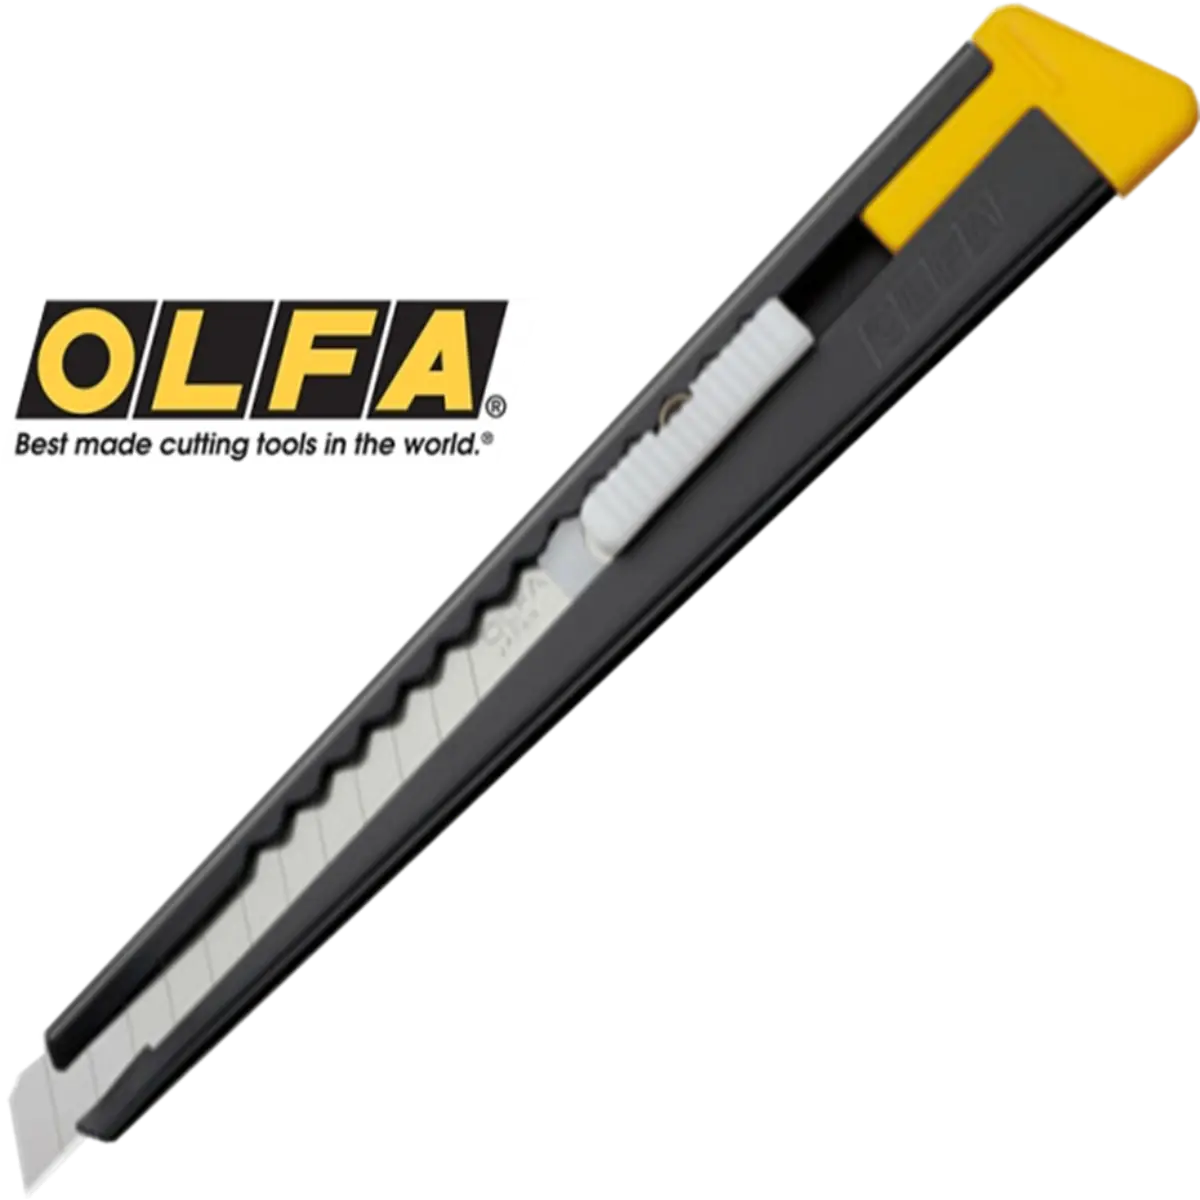 Olfa Utility Knife Model 180 BLK & Replacement Blades